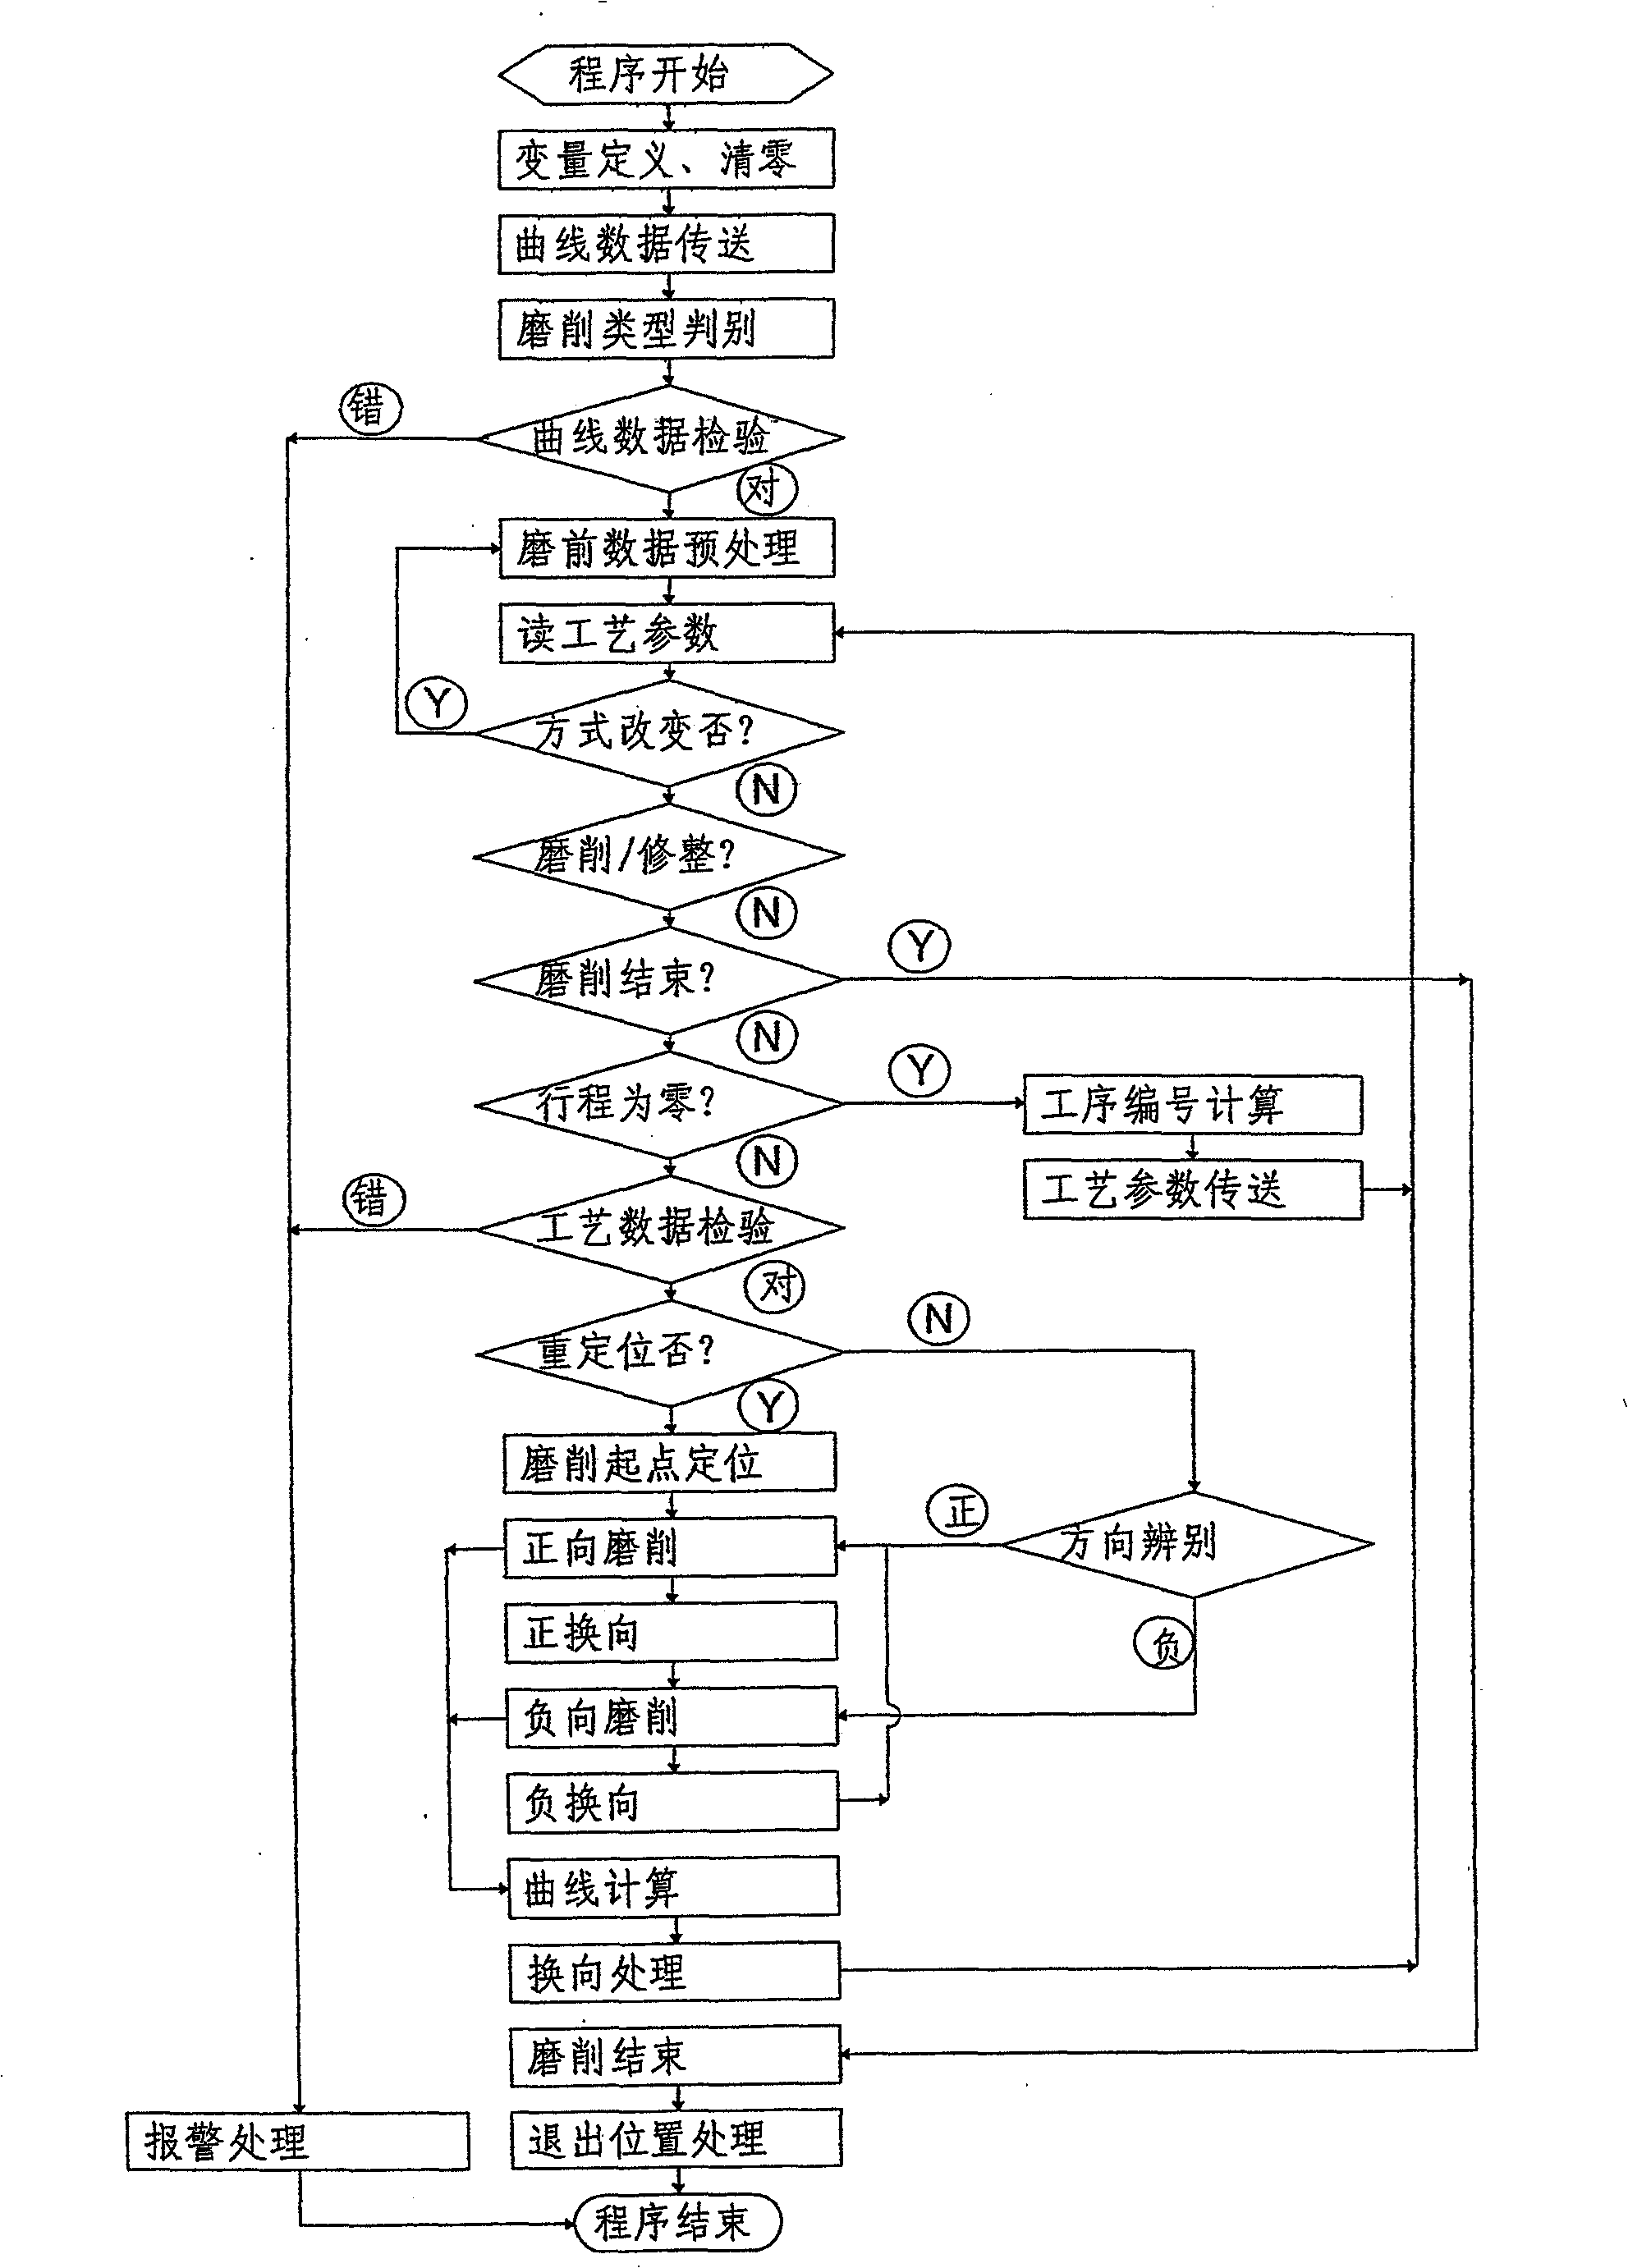 Method for realizing digital control grinding roller curve by NC programming